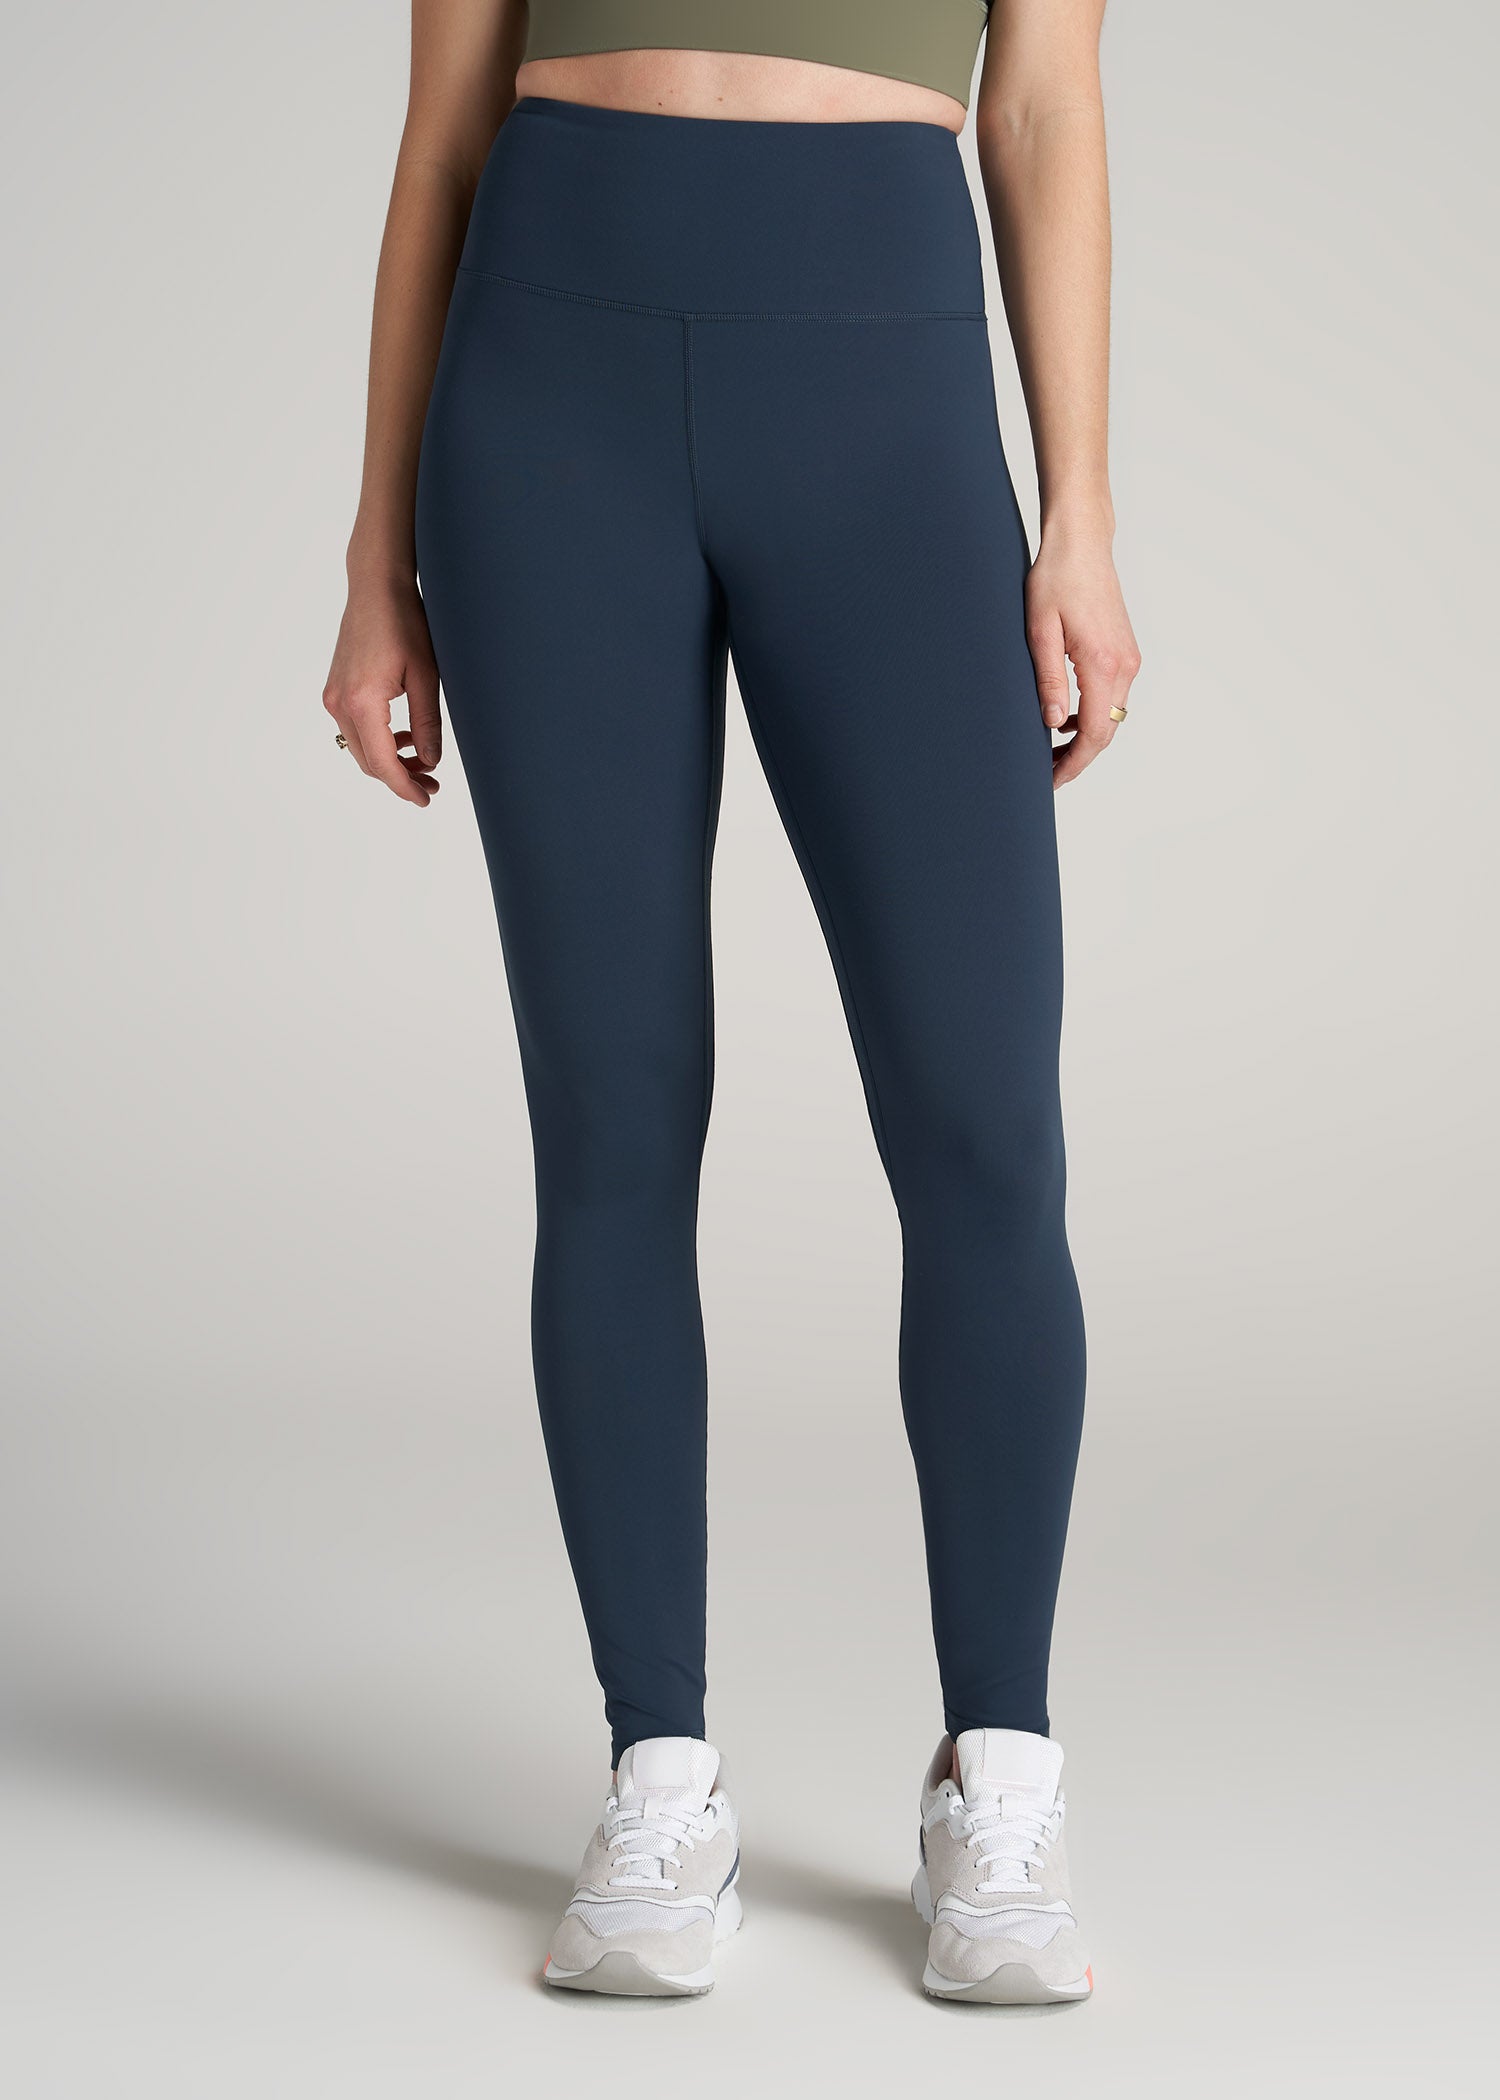 AT Balance High-Rise Leggings for Tall Women in Bright Navy